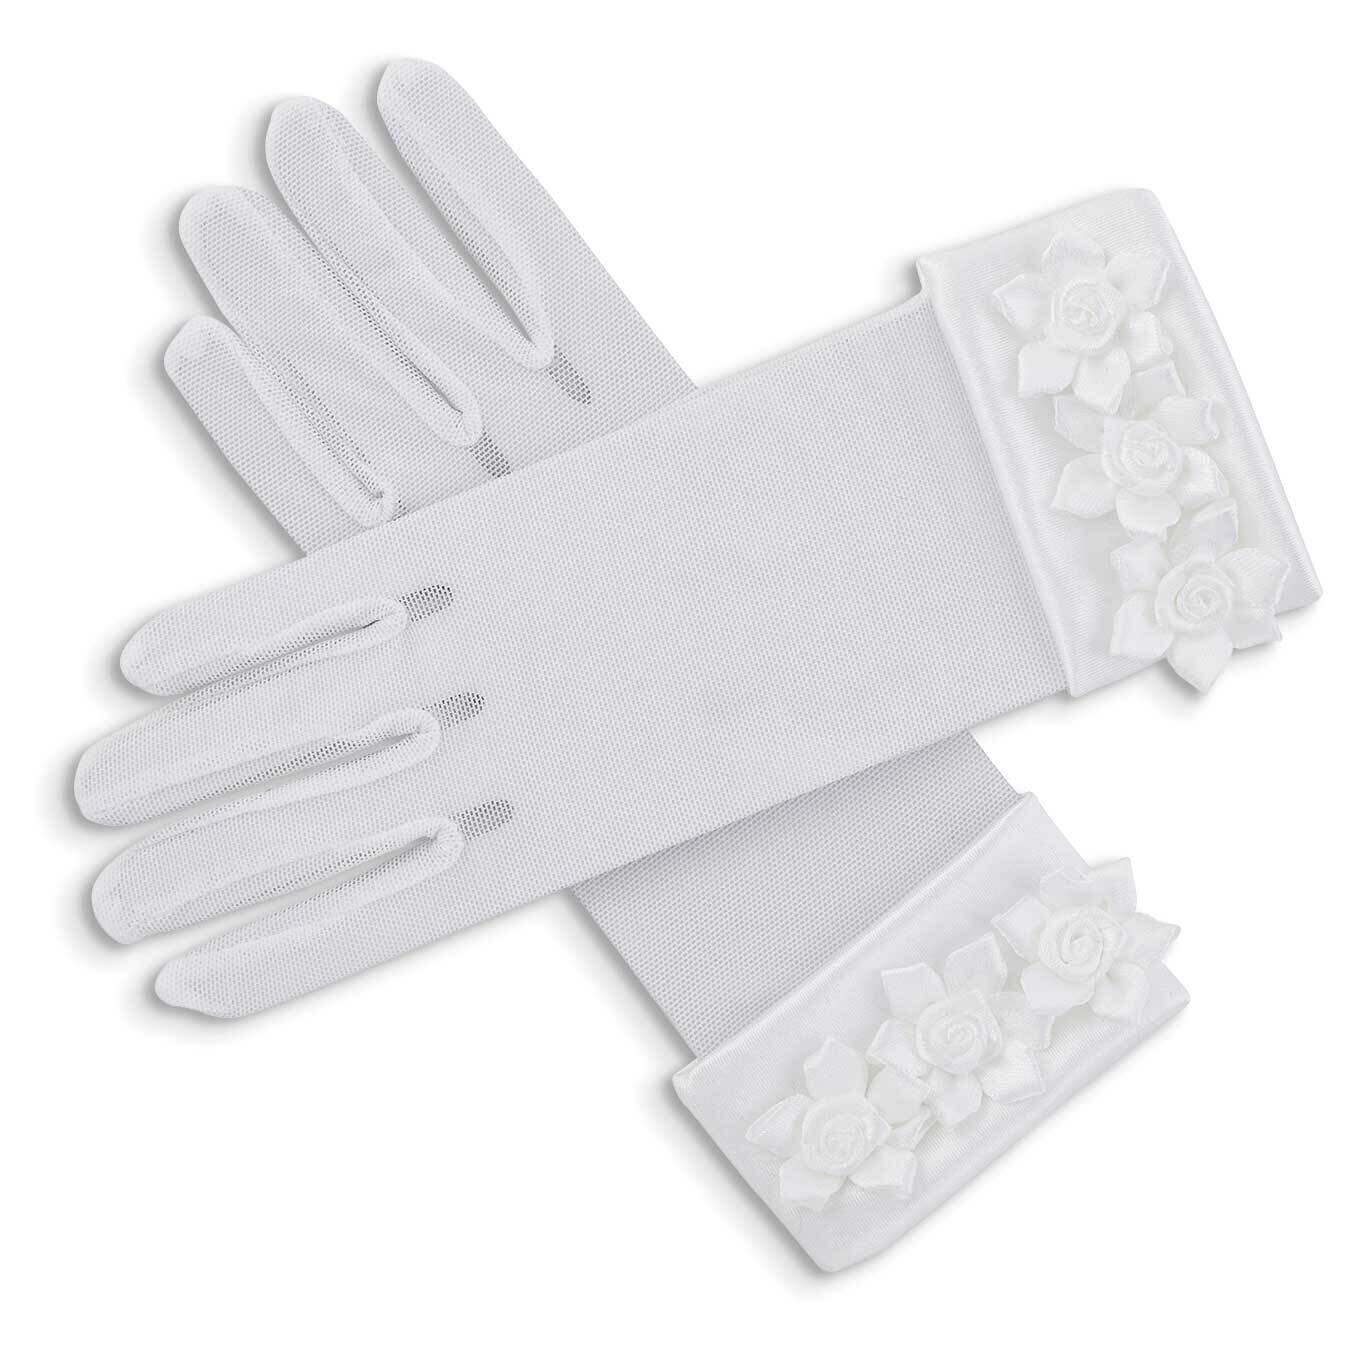 First Communion Mesh Gloves with Satin Rose Cuffs GM22972